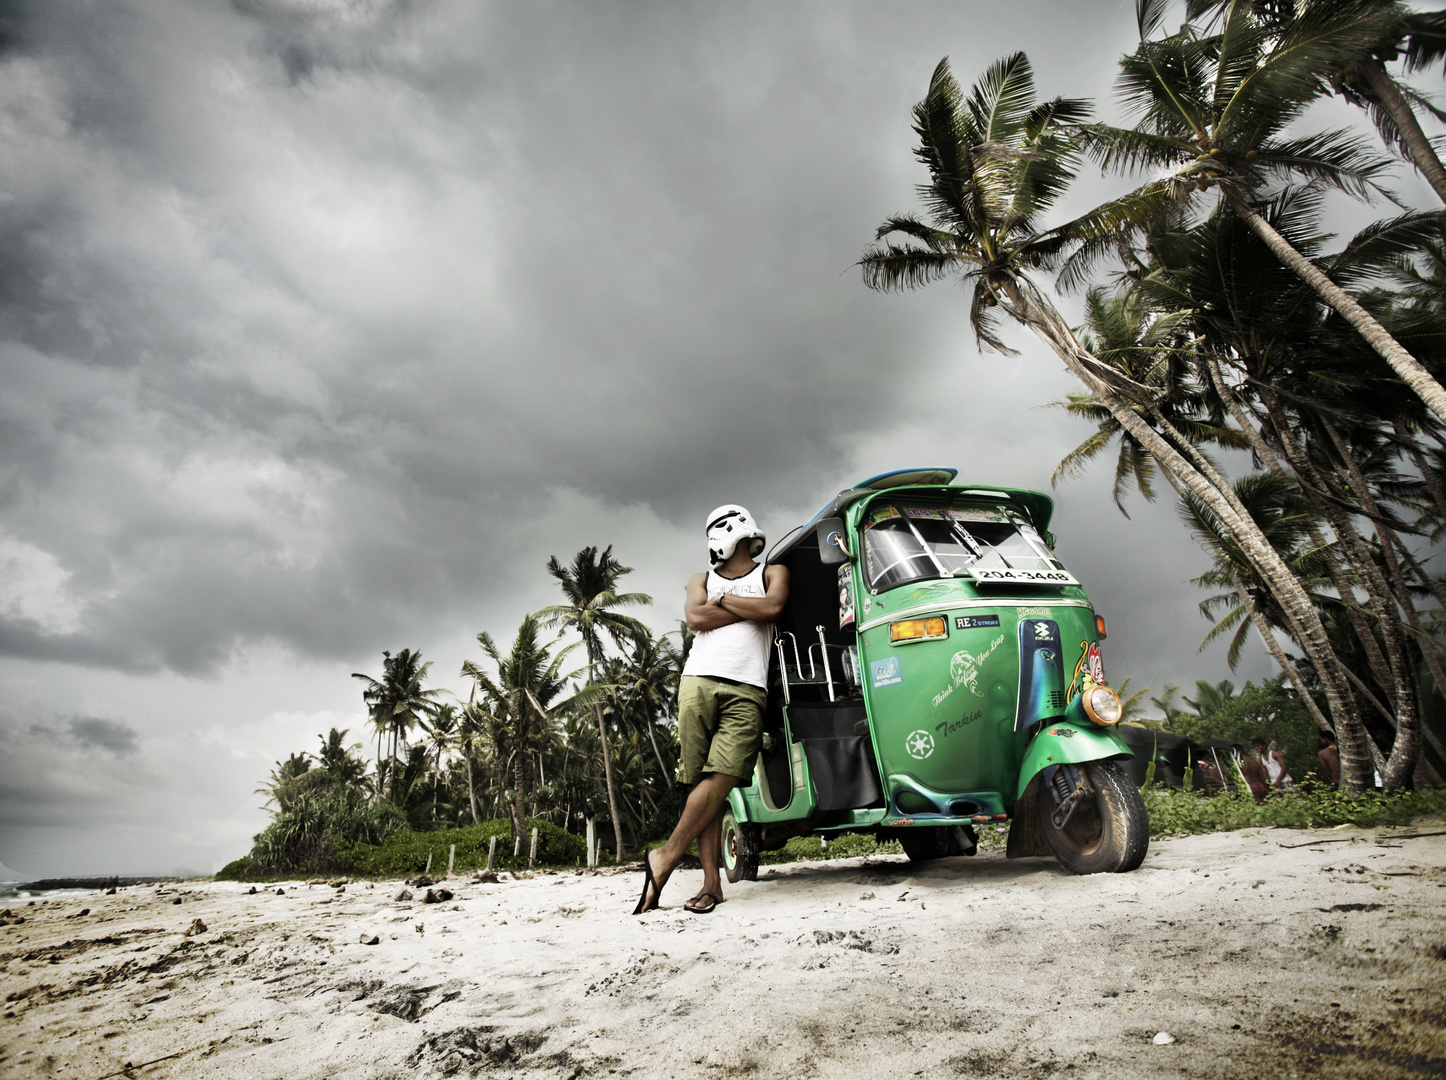 “Your Tuk Tuk’ll freeze before you reach the first marker…”